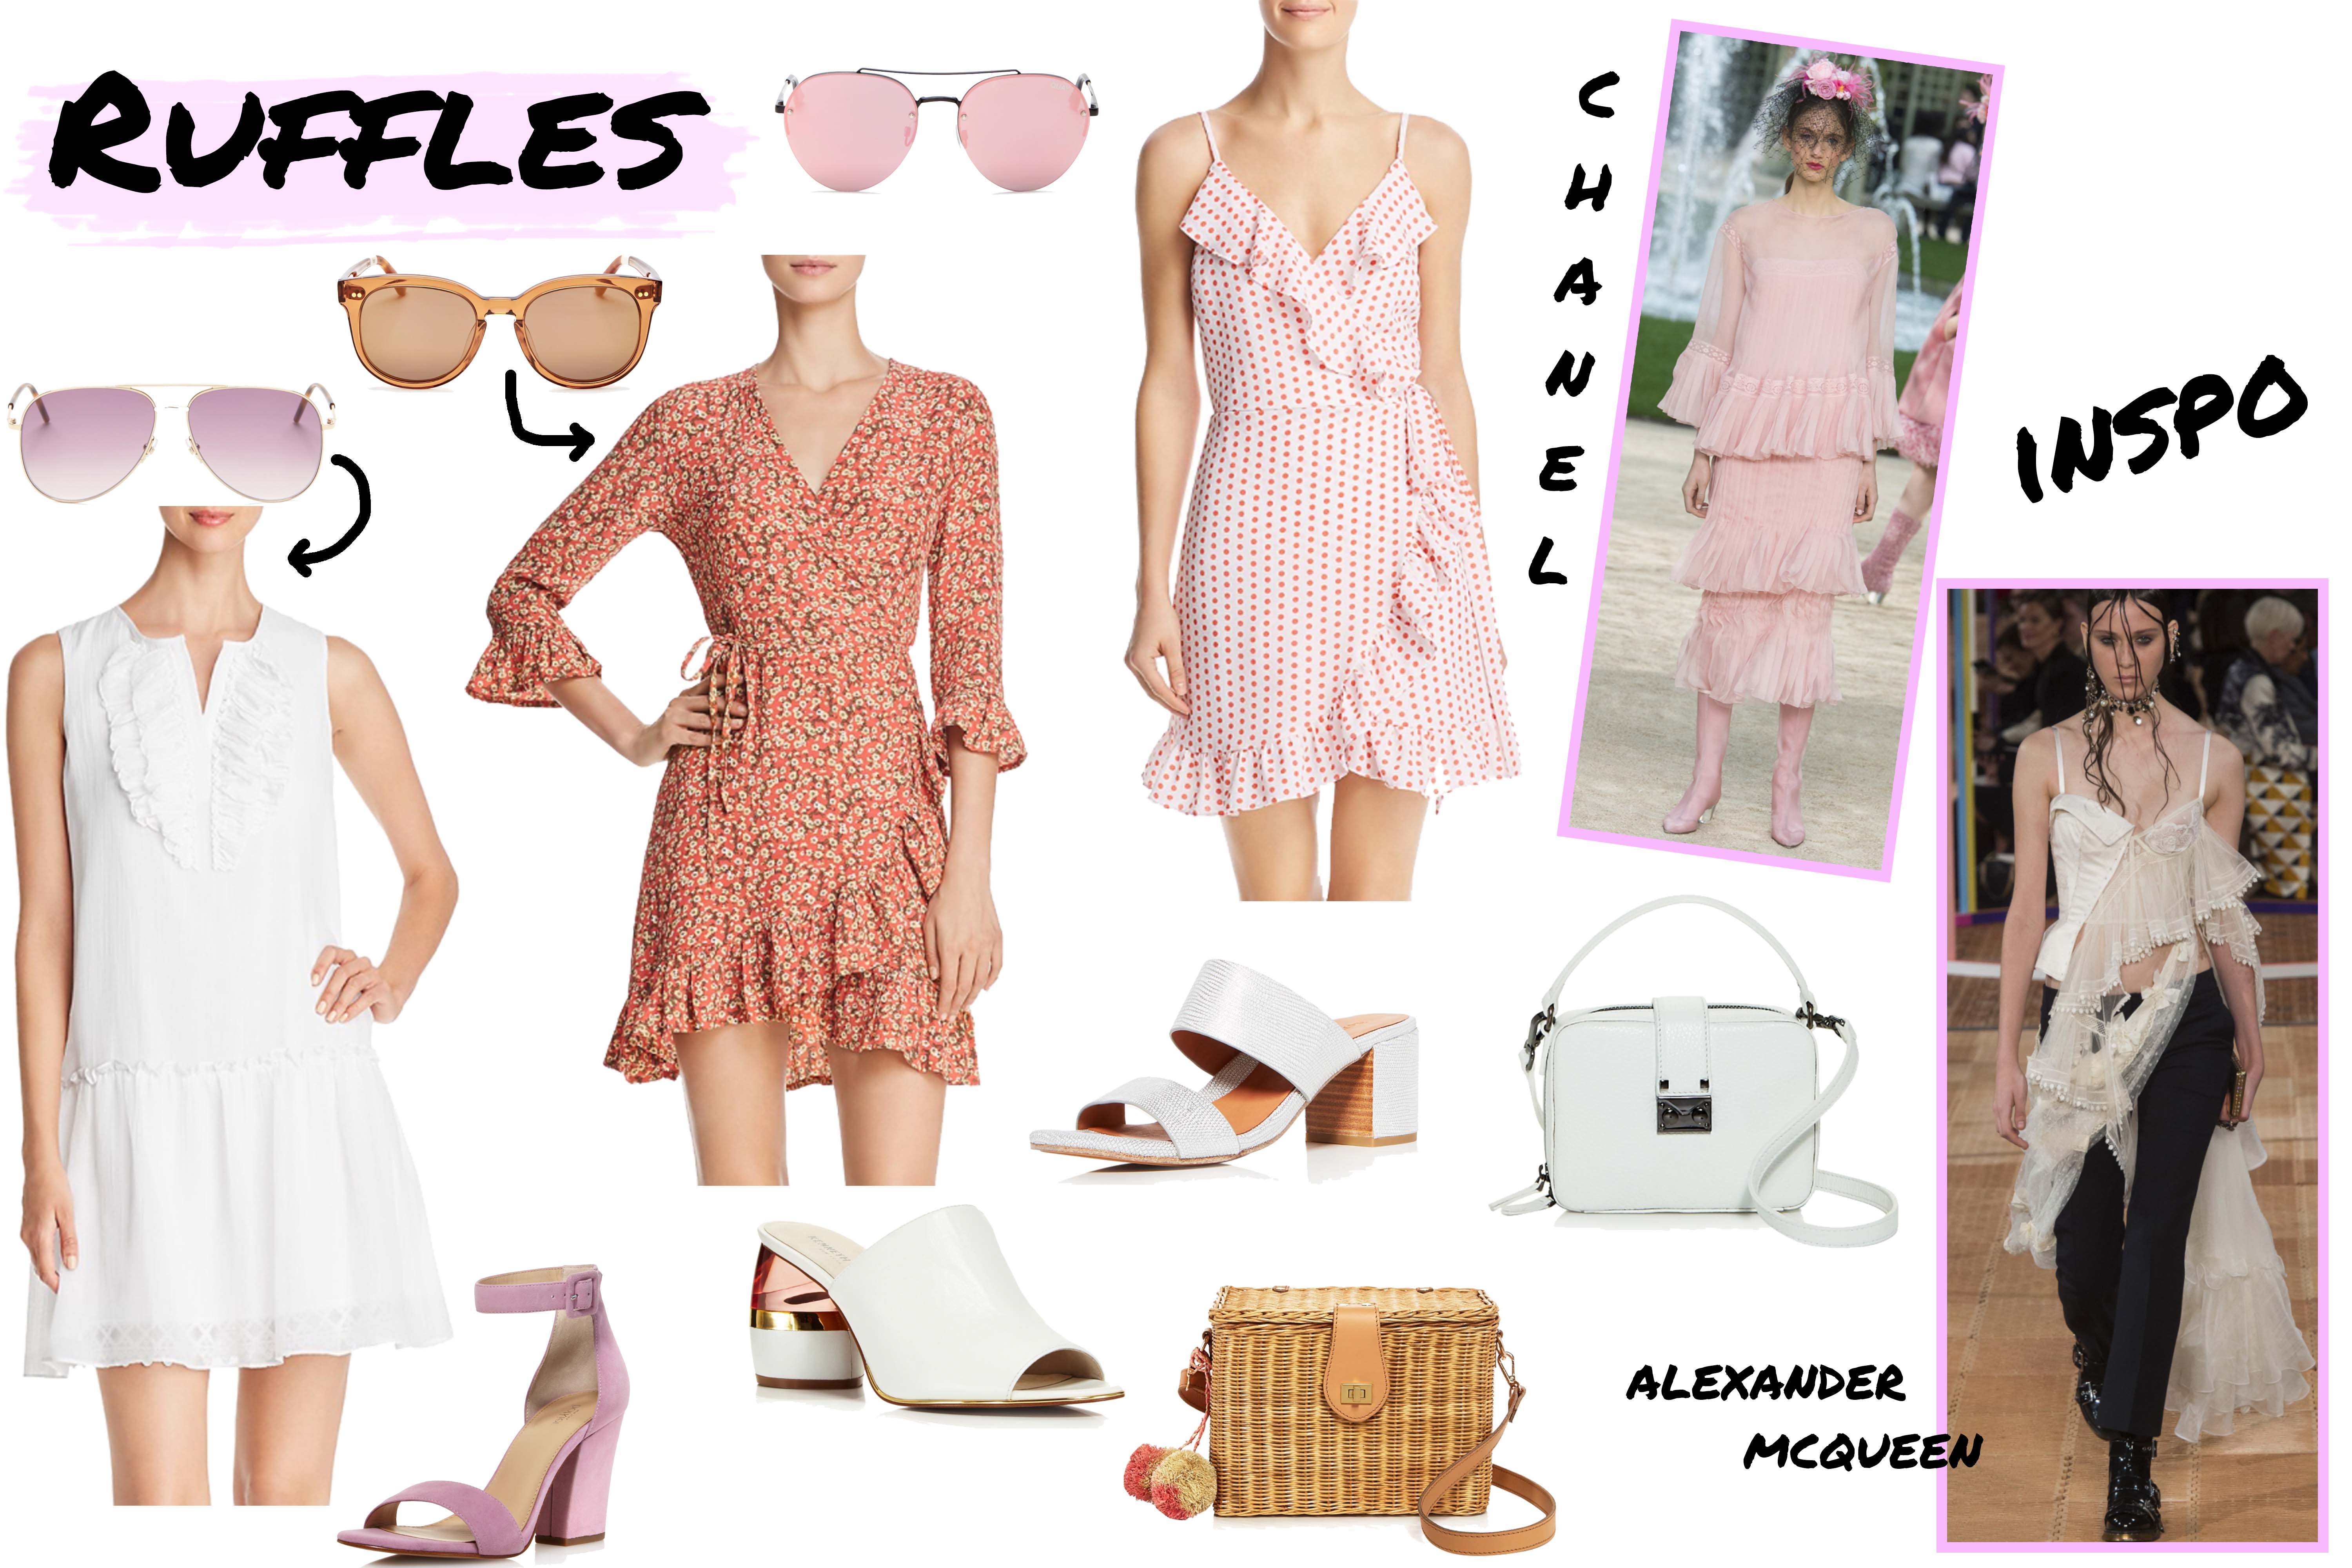 Bloomingdales Hot Fashion Show-ruffles-spring trends-mood board-style-shop the post